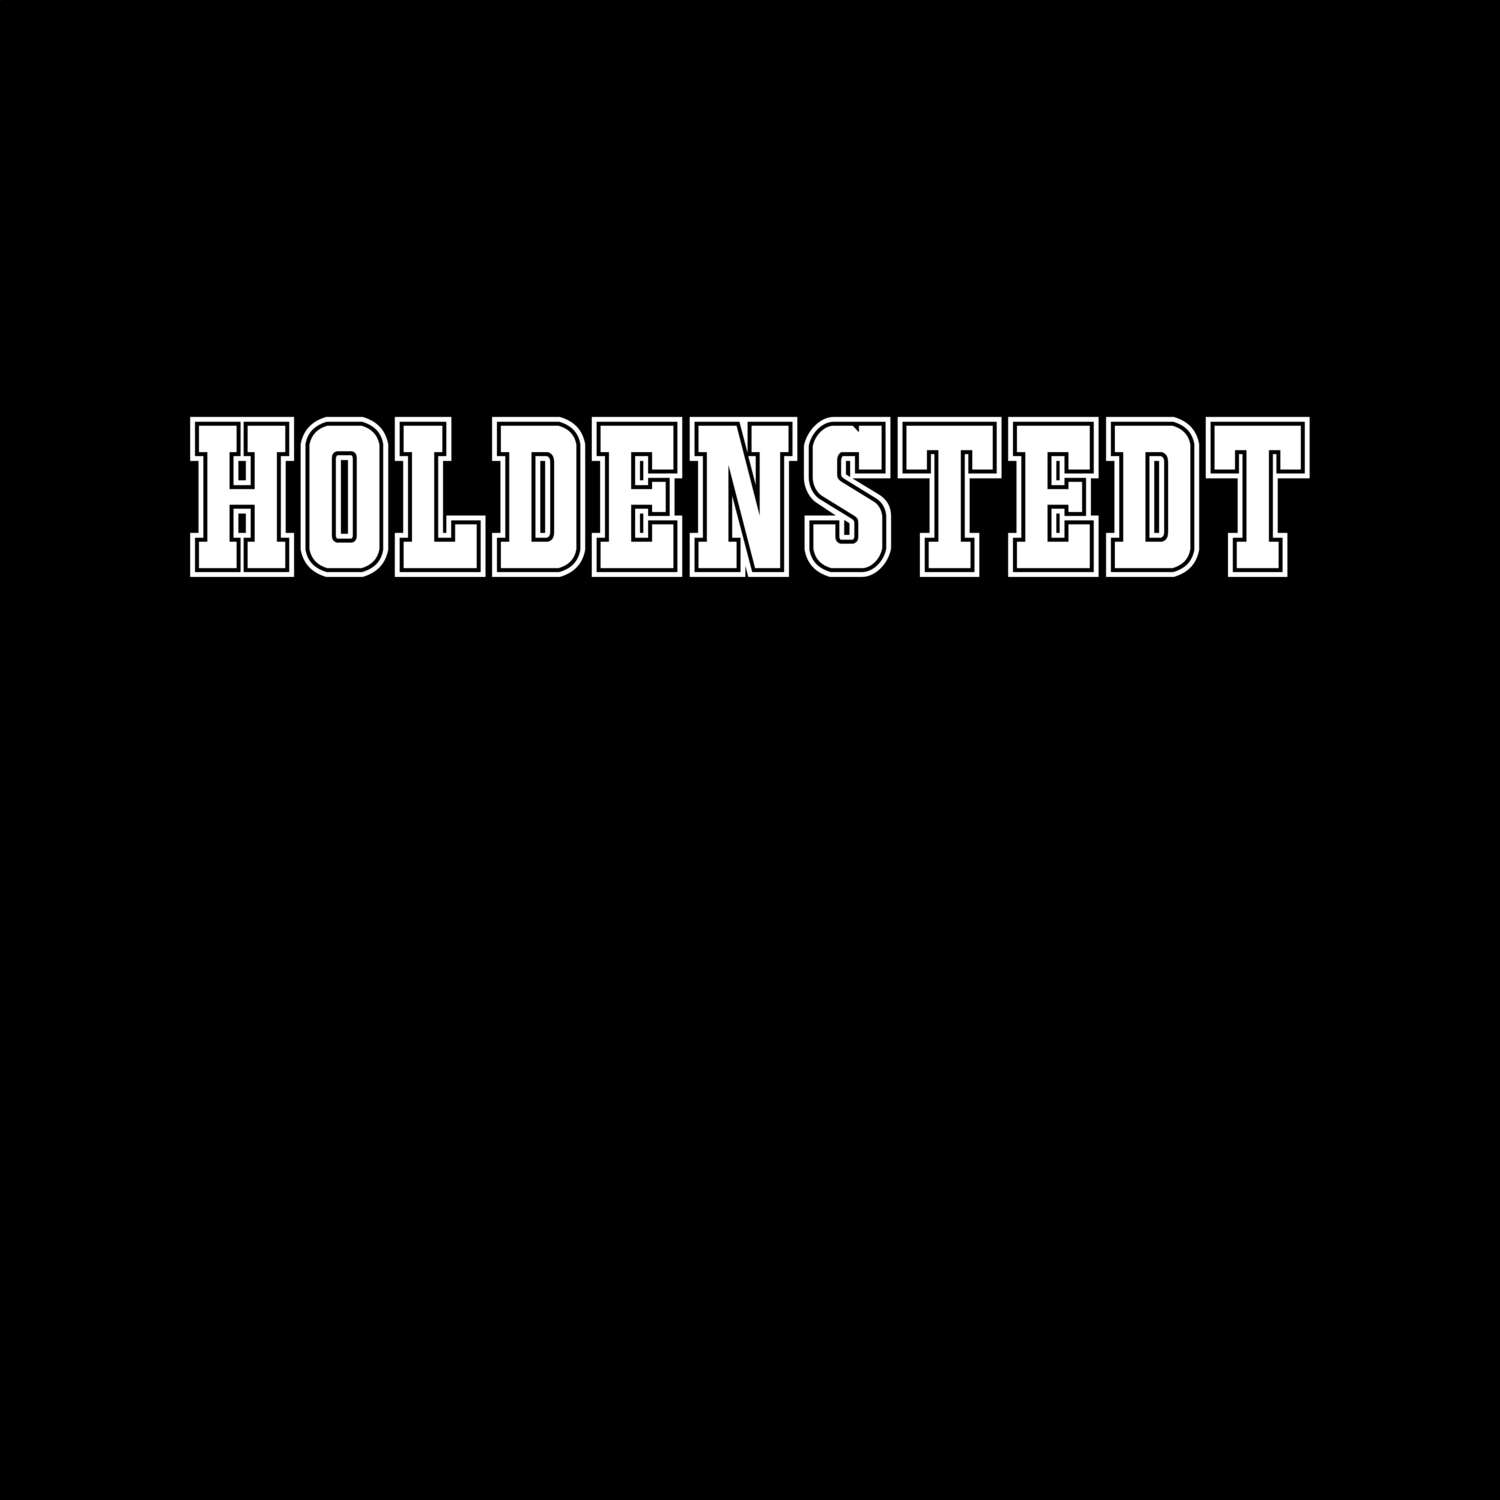 Holdenstedt T-Shirt »Classic«